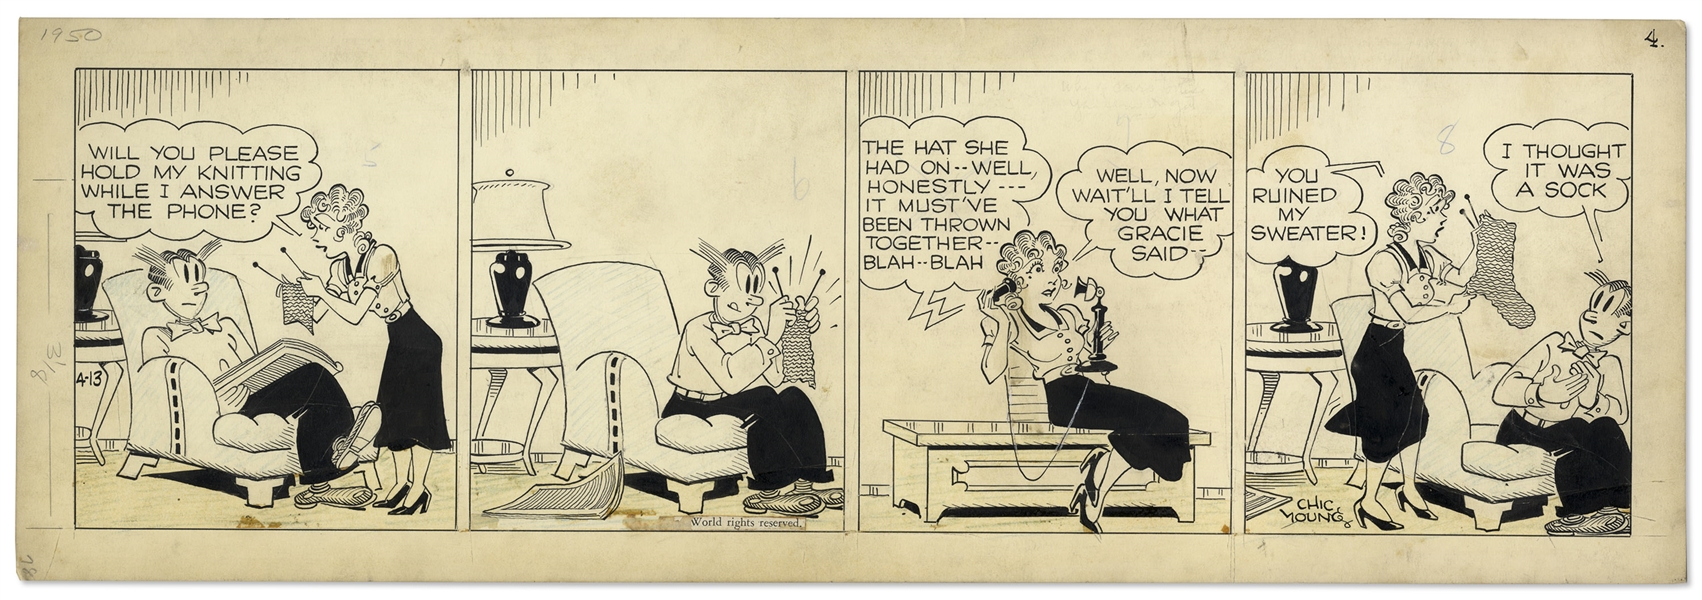 2 Chic Young Hand-Drawn ''Blondie'' Comic Strips From 1950 Titled ''A Reformer Reformed'' and ''Aged In The Wool''